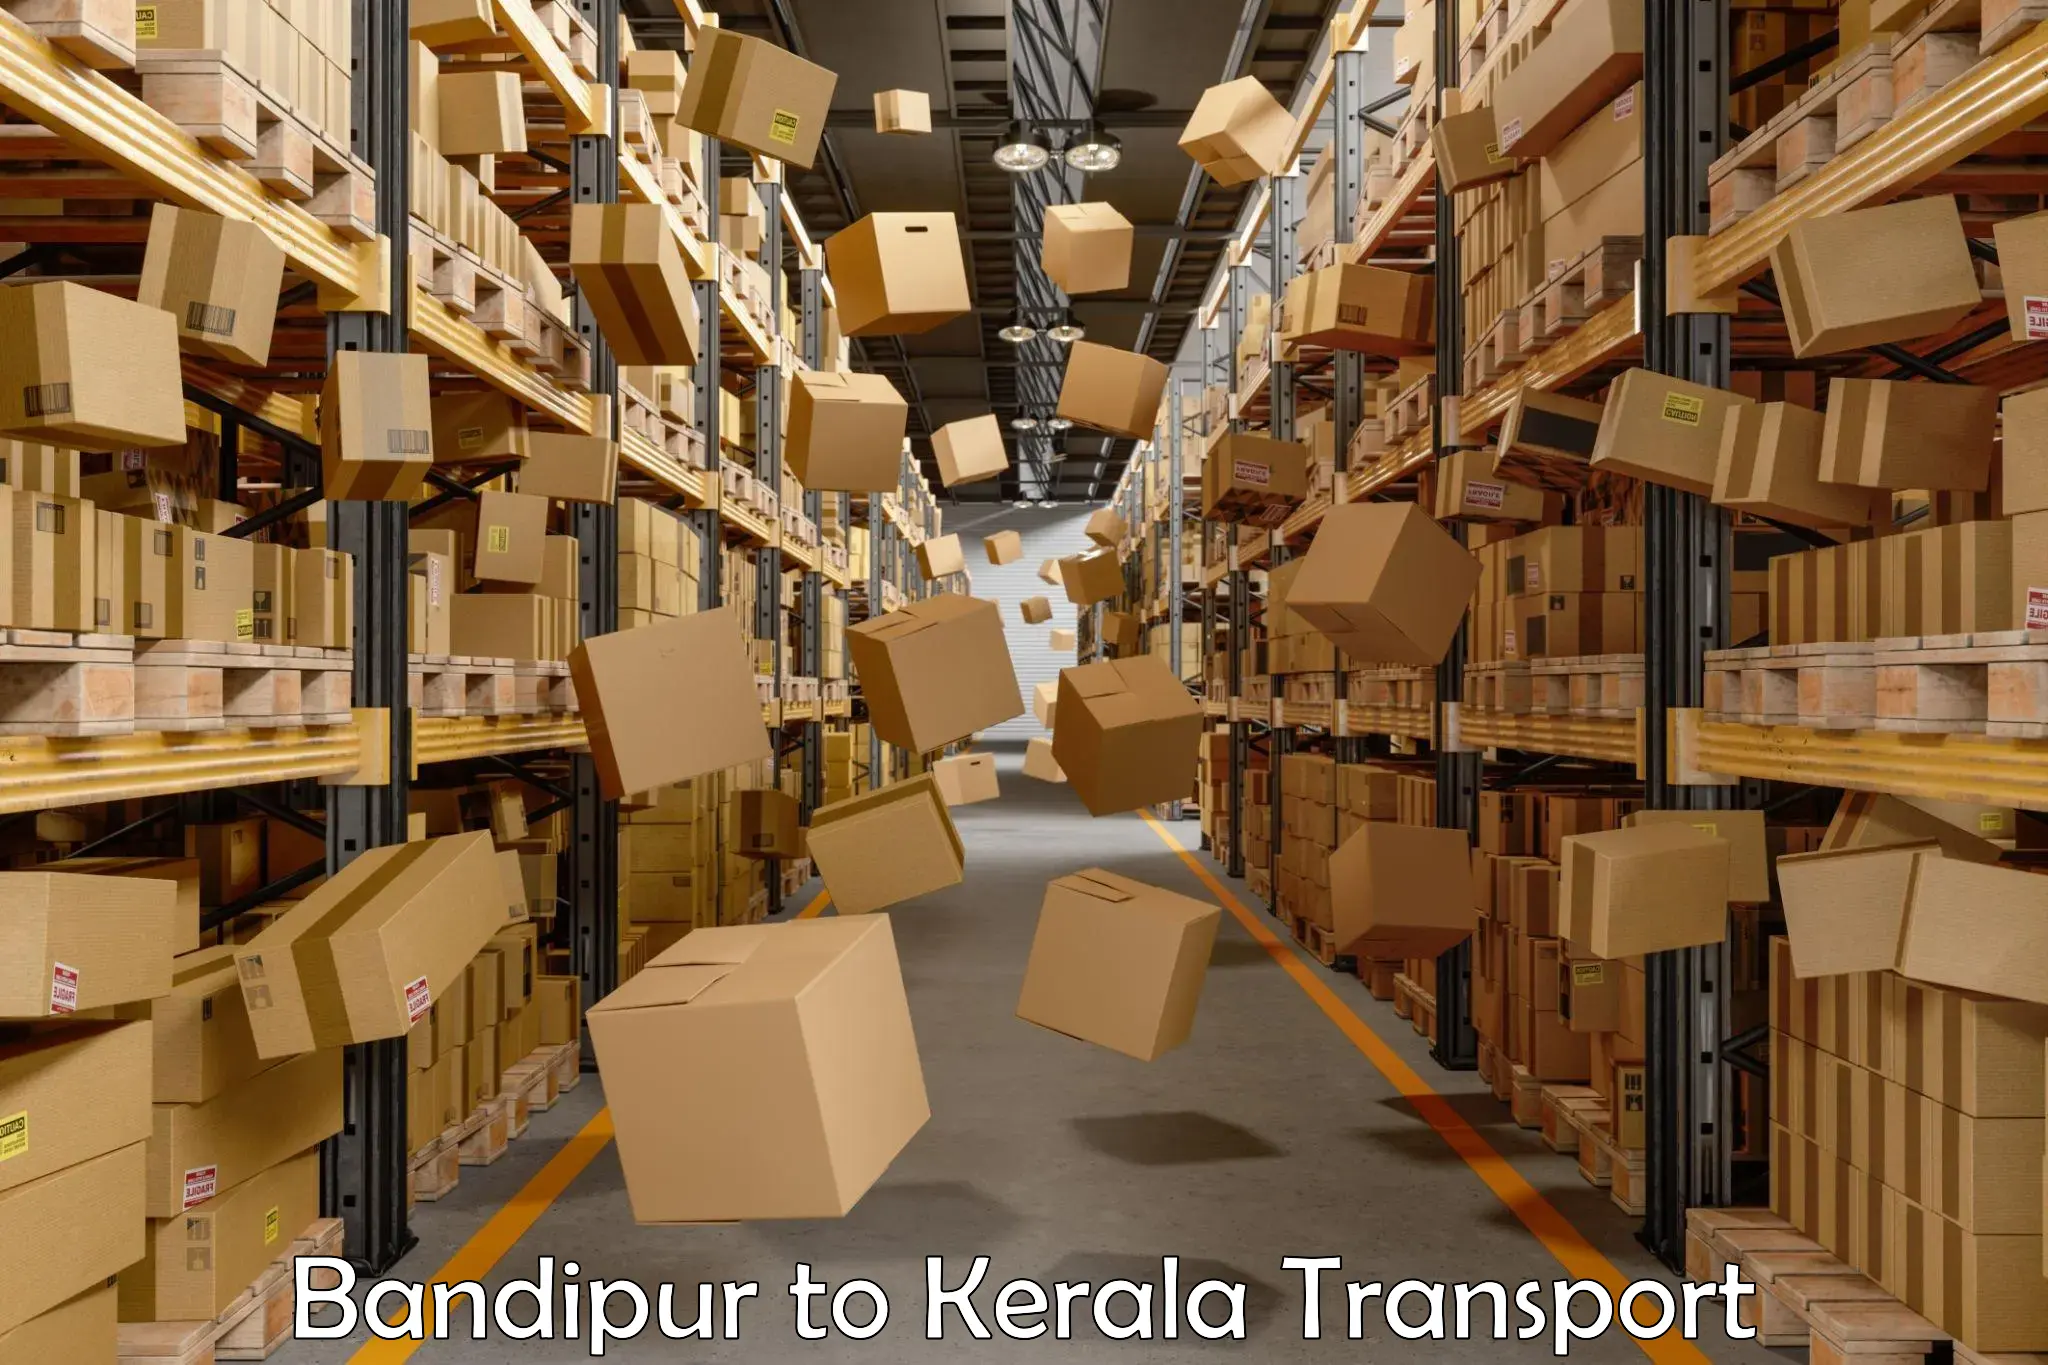 Daily parcel service transport Bandipur to Puthukkad